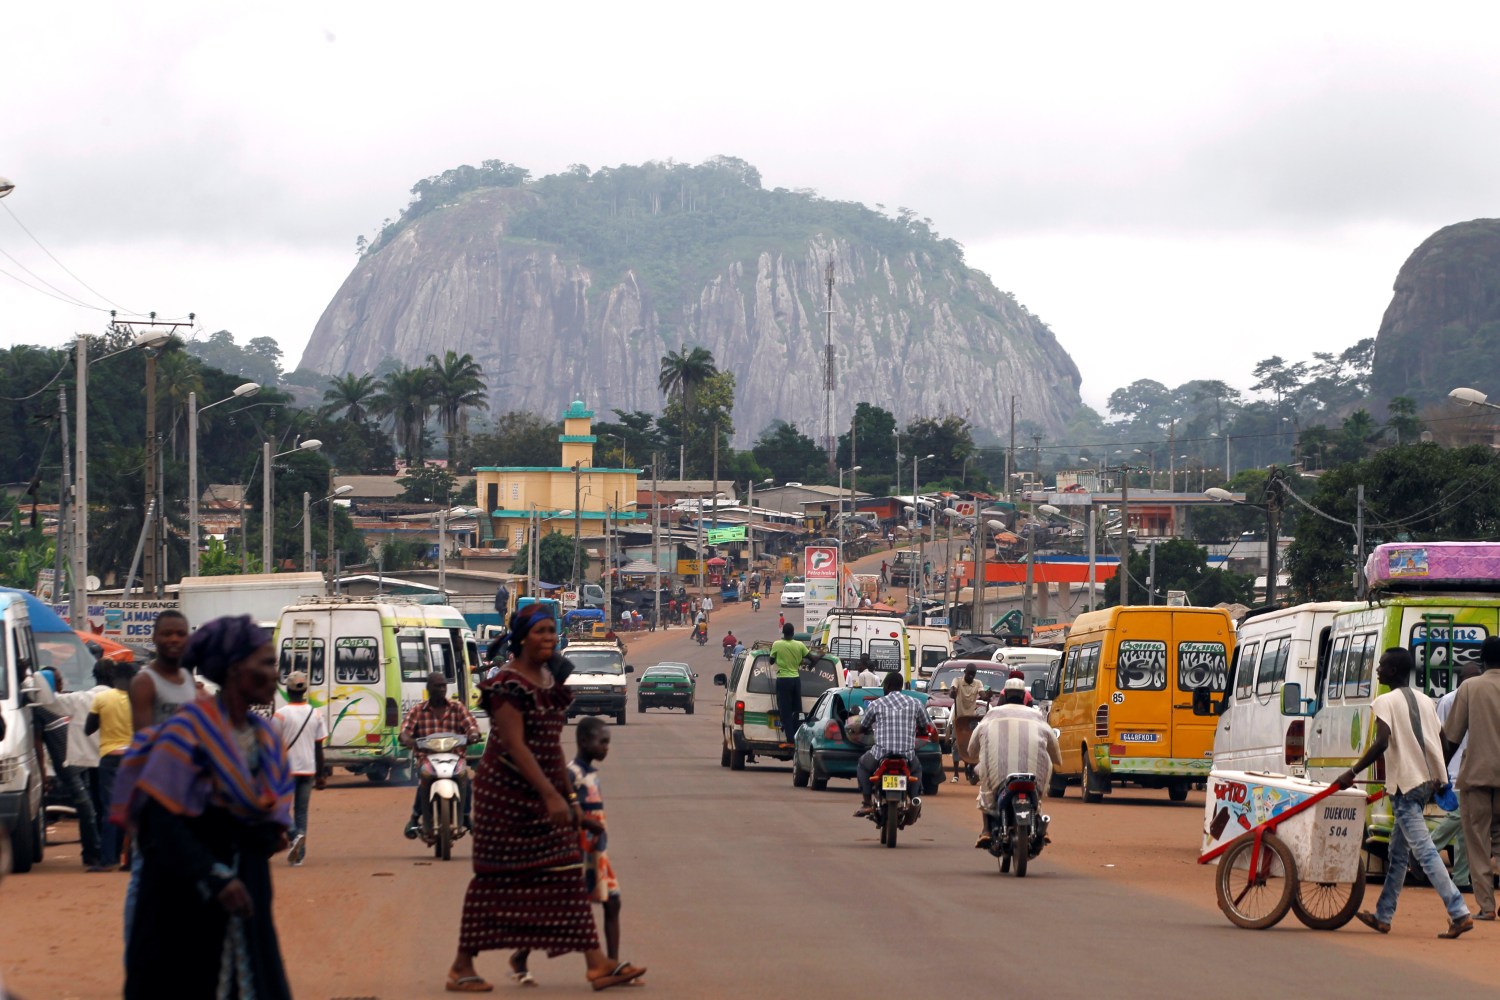 People walk in the city of Duekoue in western Ivory Coast August 18, 2015. Mont Peko is one of the protected parks of Duekoue department. Picture taken August 18, 2015. REUTERS/Luc Gnago - D1BETSIPBCAA